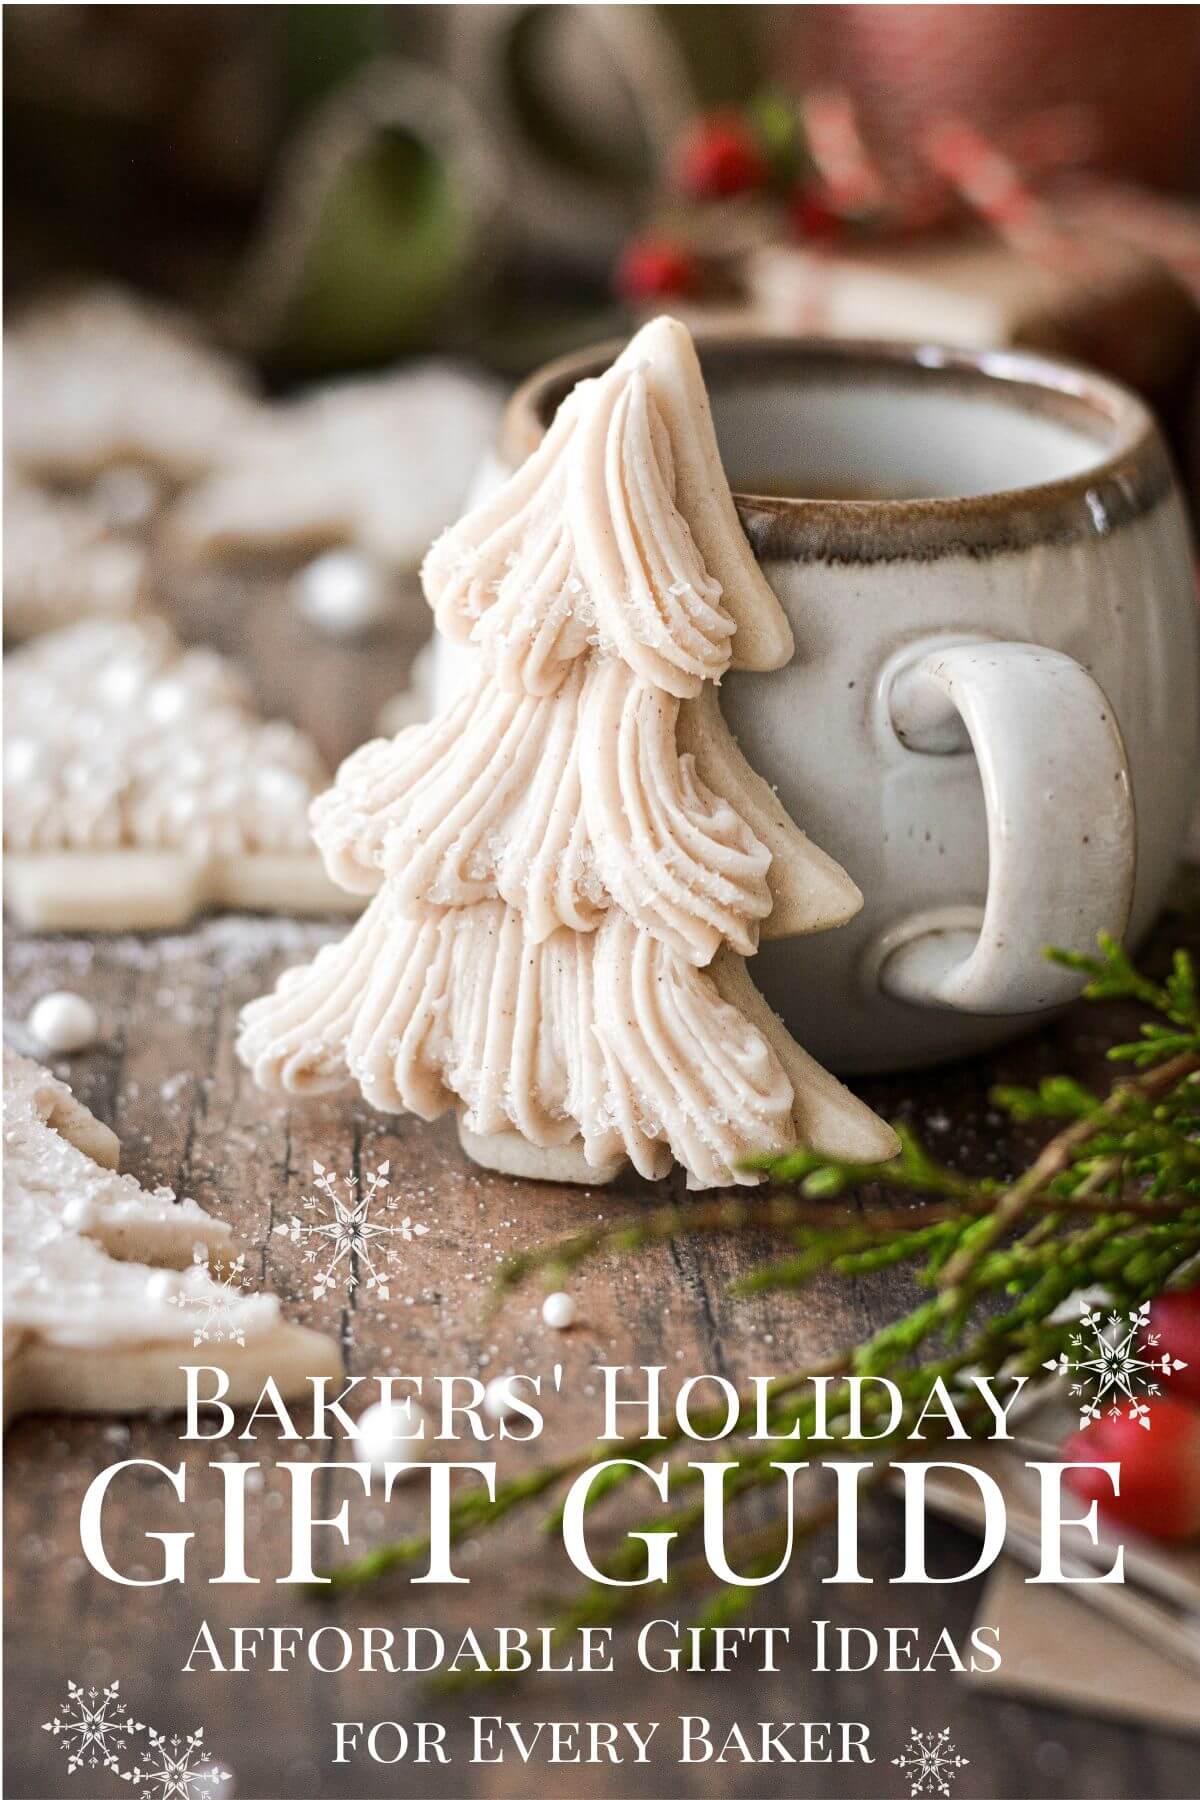 Bakers' holiday gift guide graphic.